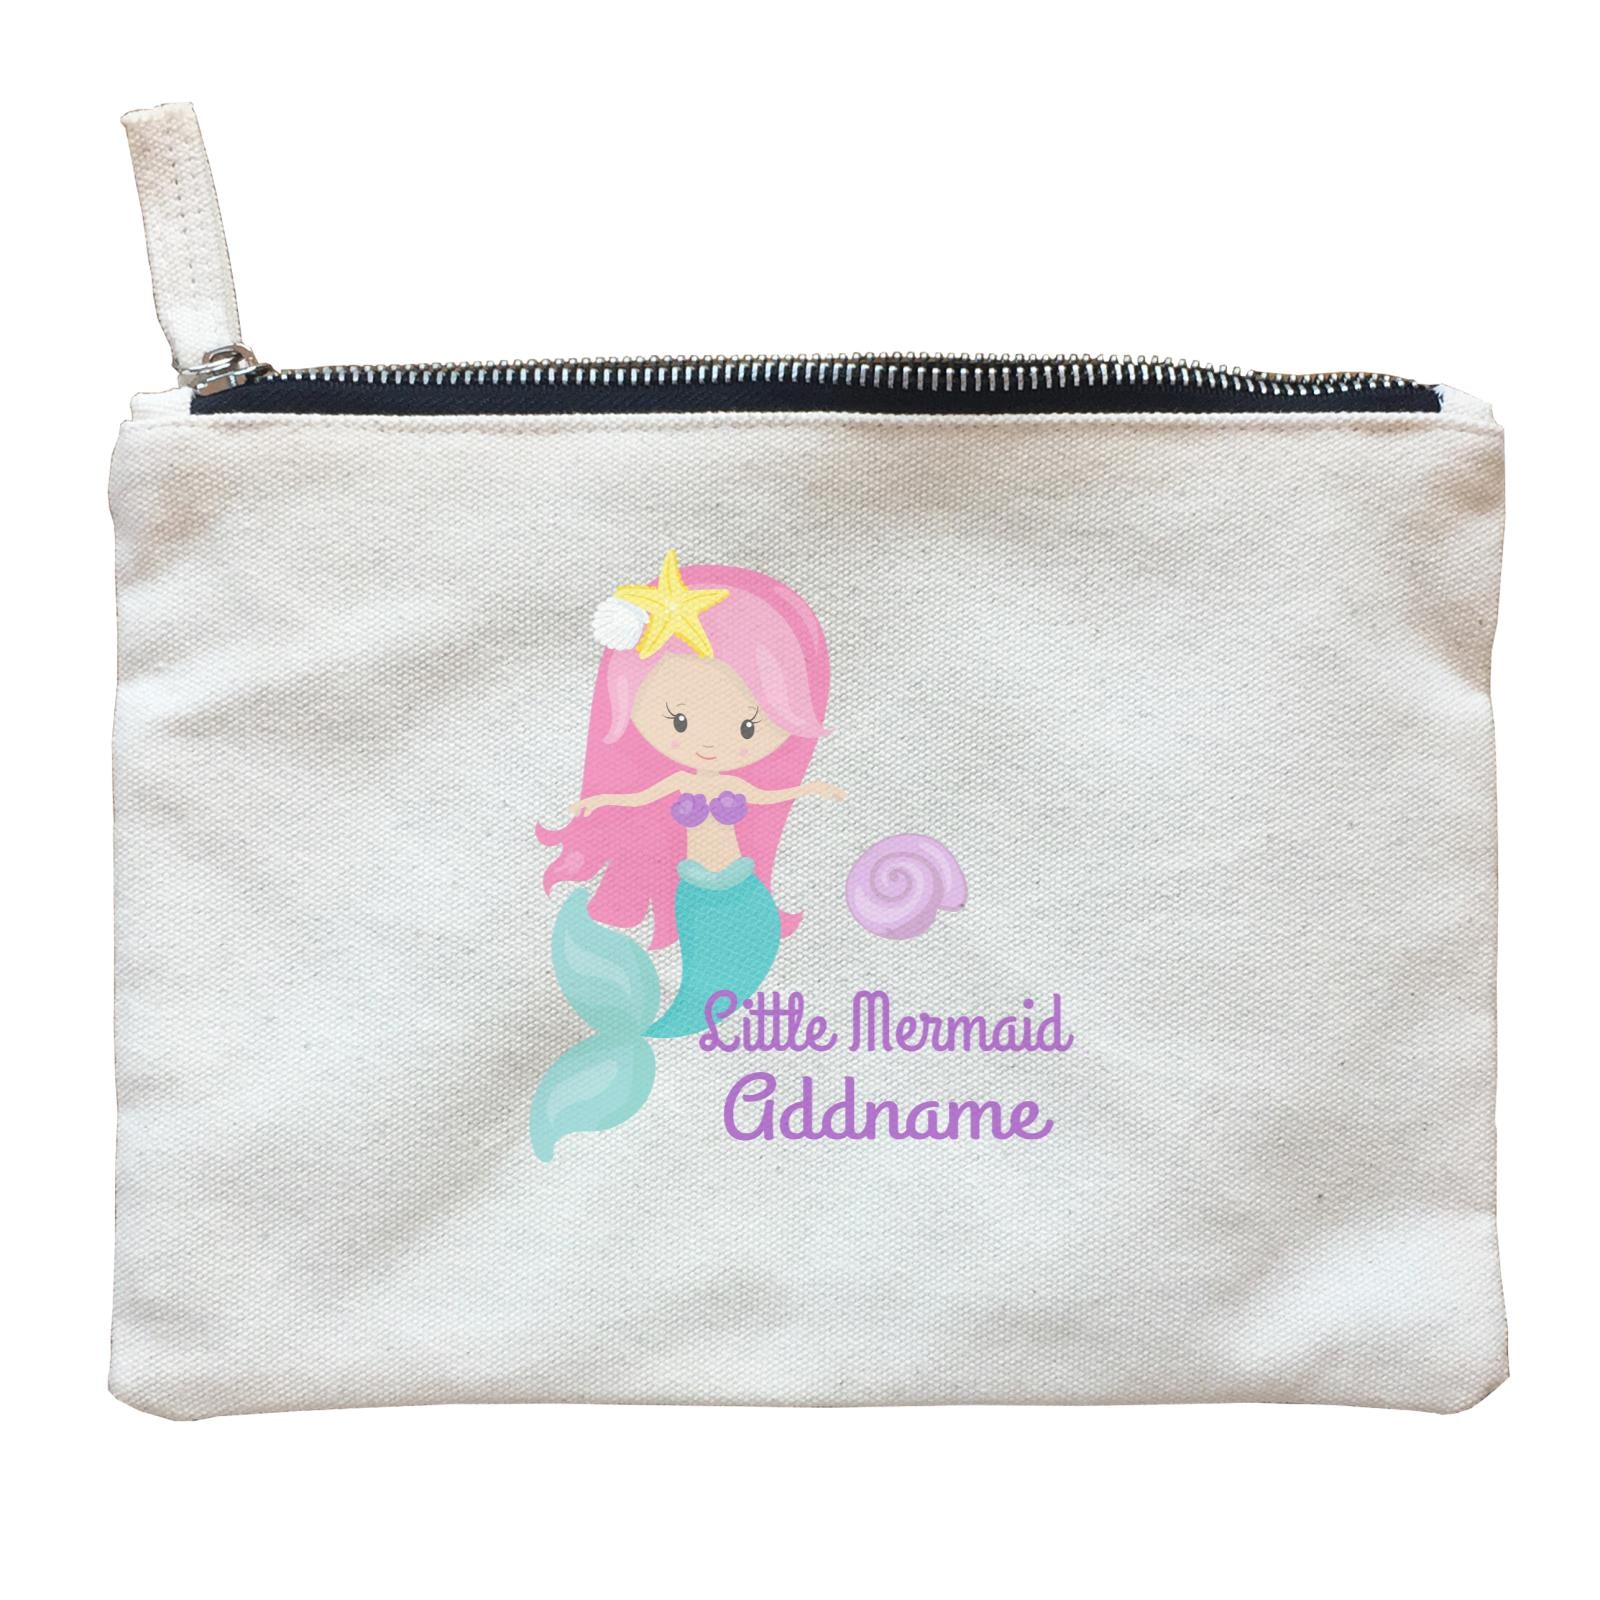 Little Mermaid Upright with Seashell Addname Zipper Pouch